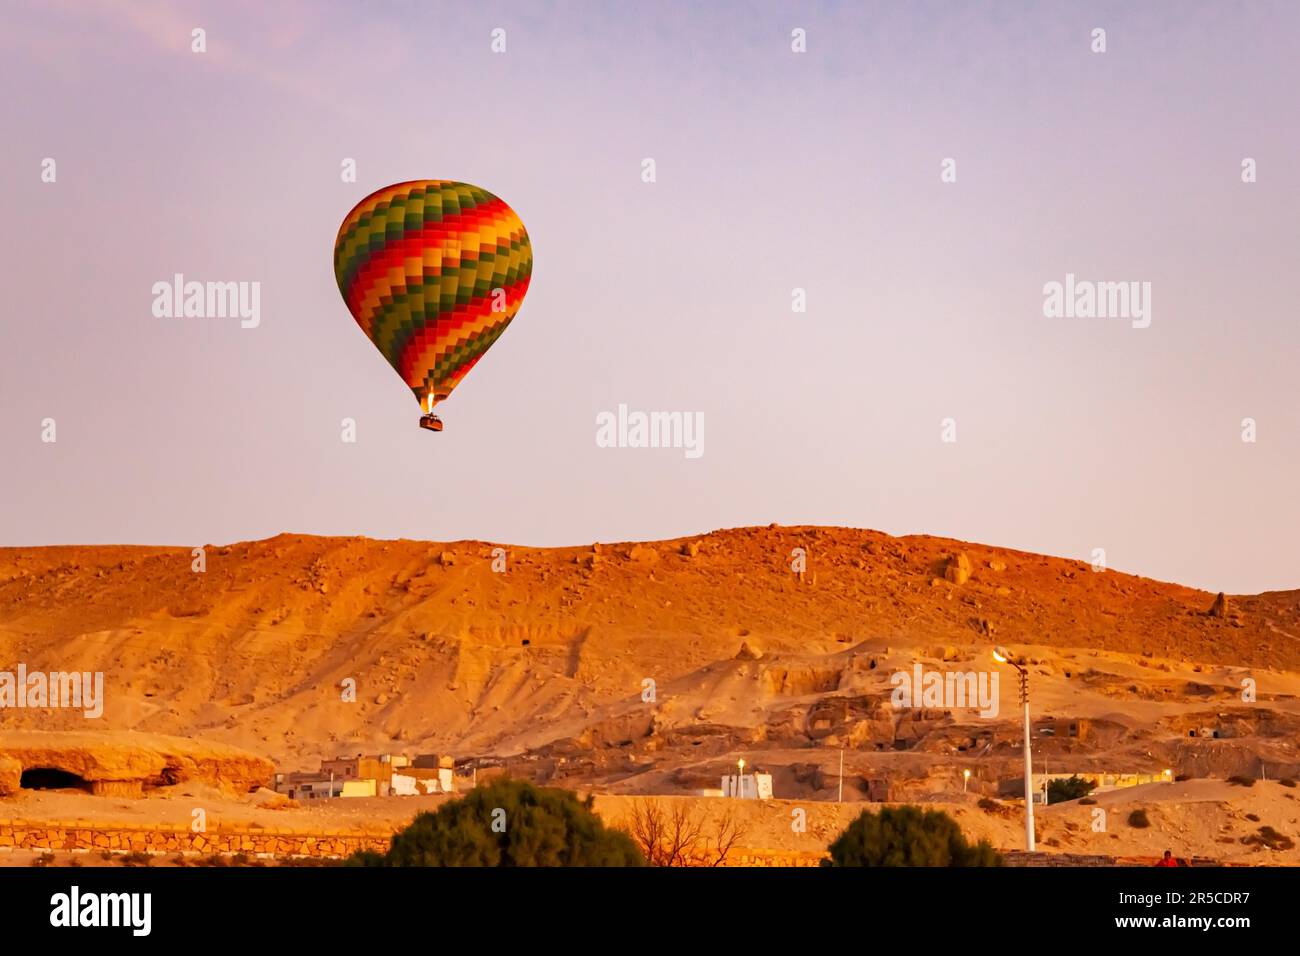 Colorful hot air balloon flying over Valley of The Kings in the morning at Theban Necropolis, Luxor, Upper Egypt Stock Photo